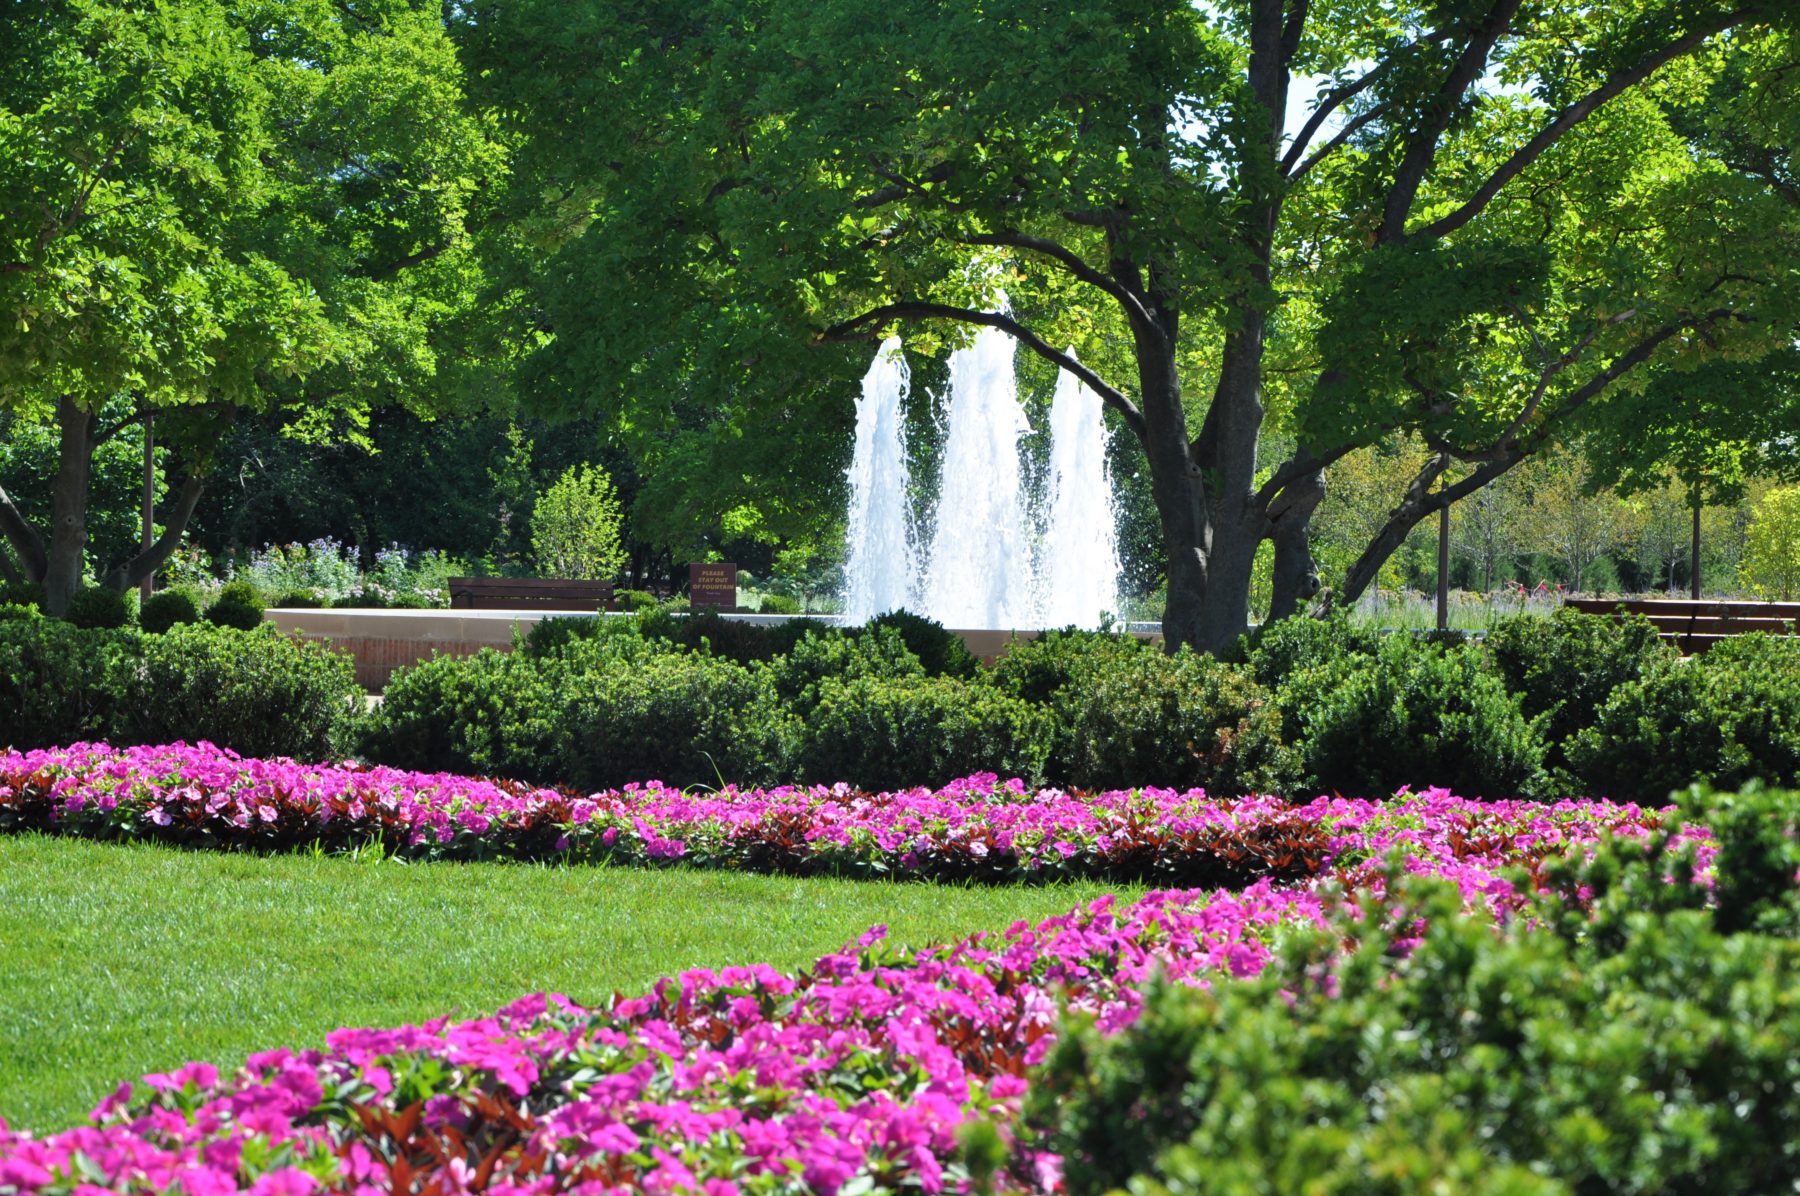 A row of pink flowers in front of green shrubbery with a fountain in the background